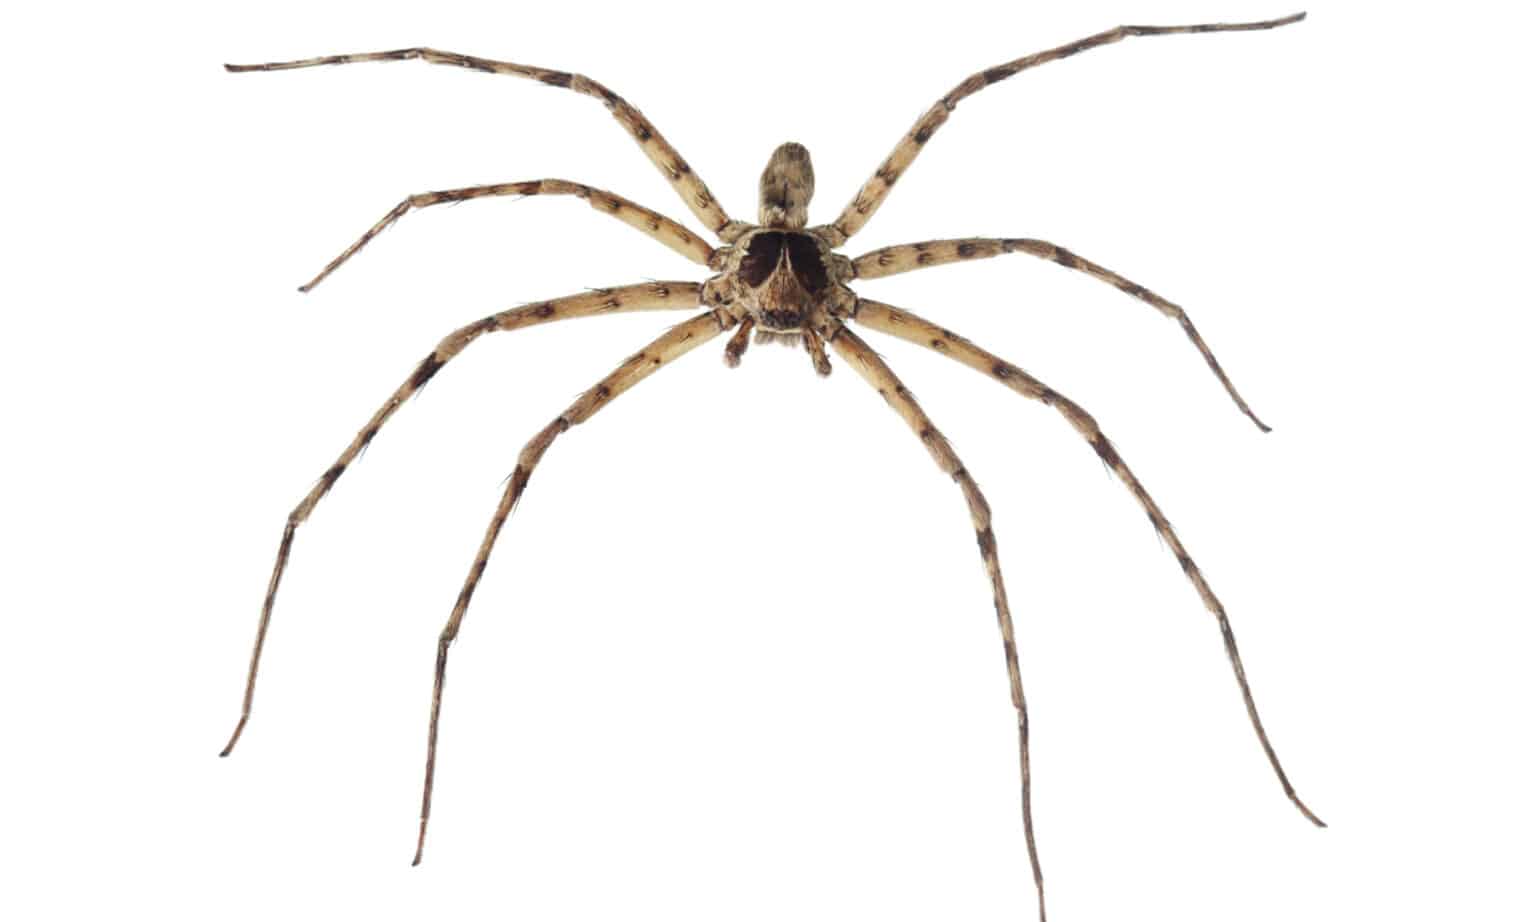 Cane Spiders in Hawaii: How Big are They? - AZ Animals